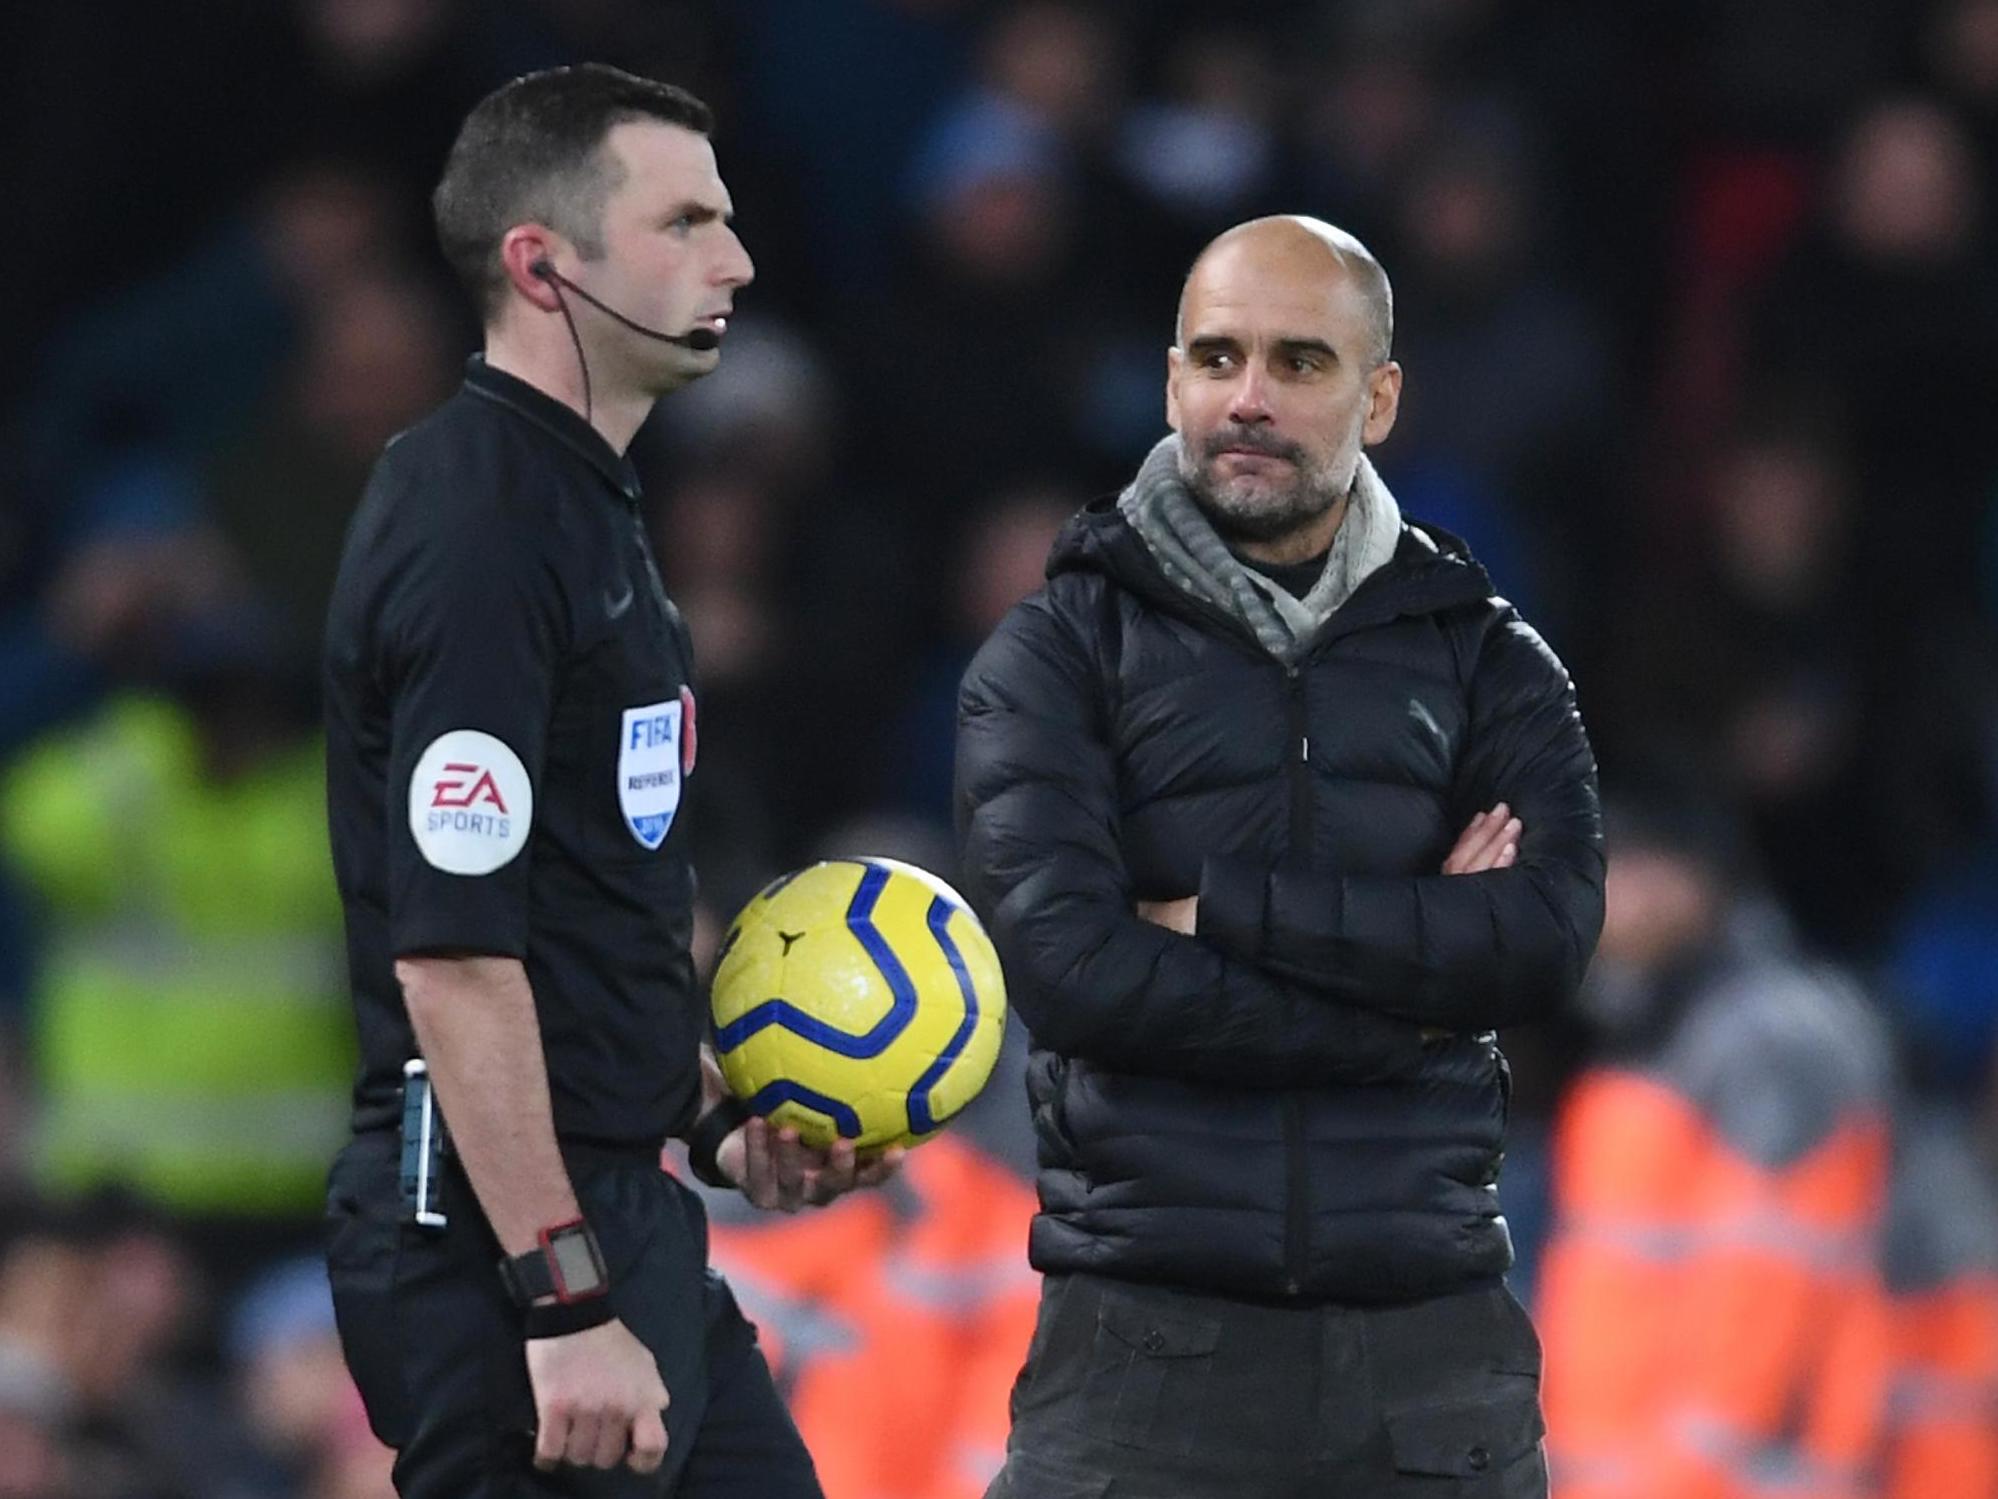 Referee Michael Oliver and Manchester City manager Pep Guardiola